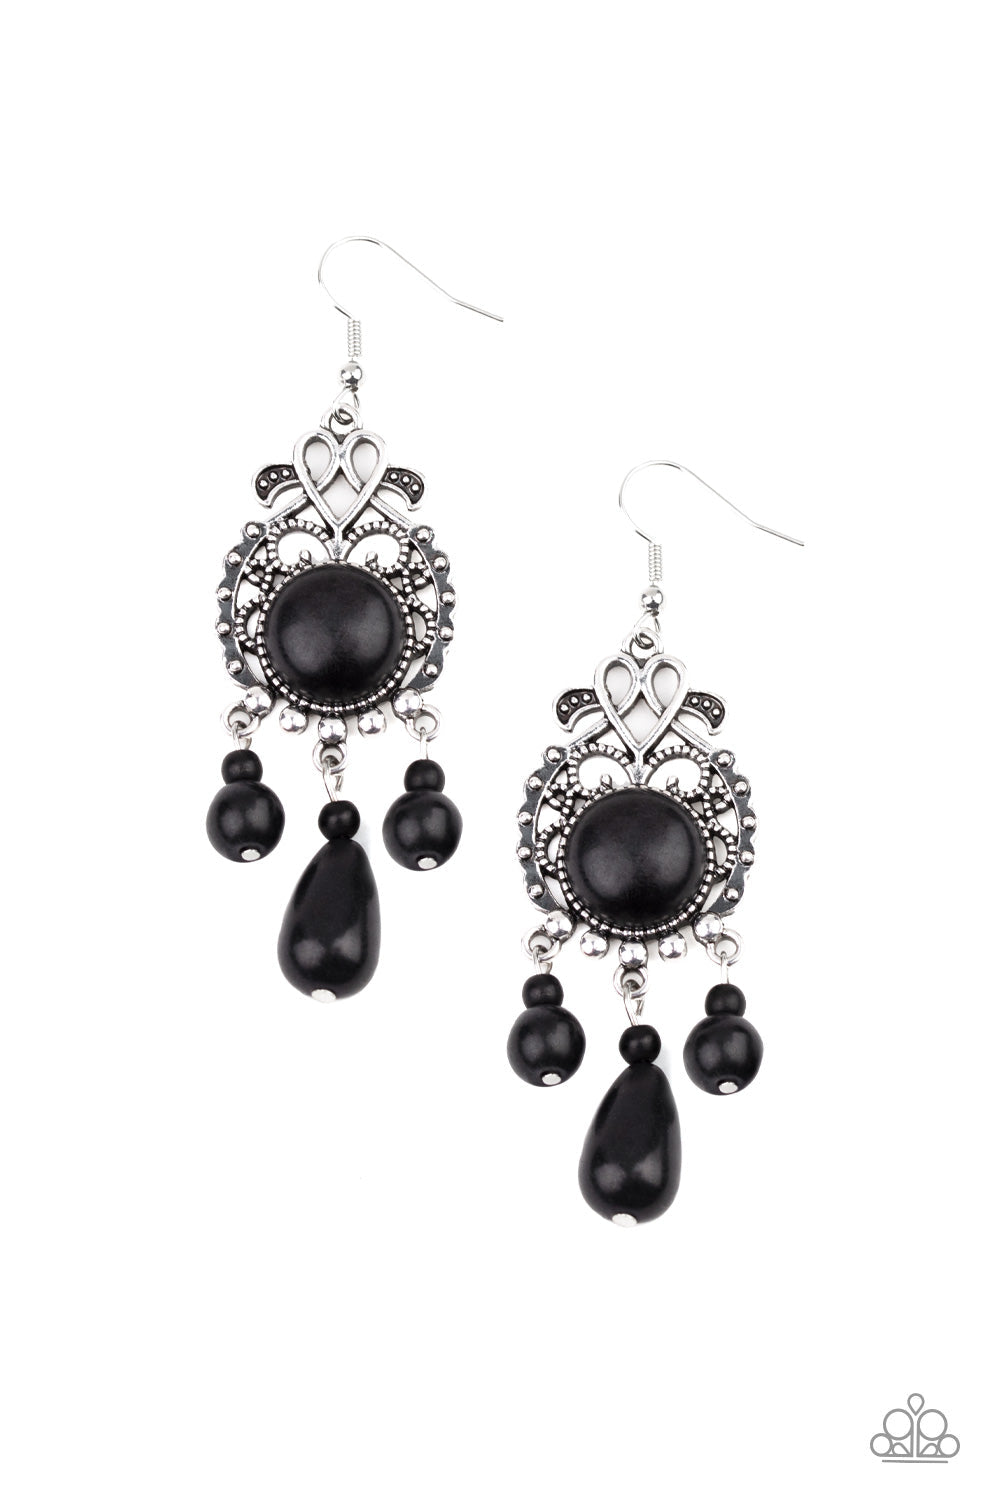 Stone Bliss - Black Stone - Silver Earrings - Paparazzi Accessories - Dotted with a round black stone center, a frilly silver frame gives way to a beaded black stone fringe for a whimsical fashion earrings. Trendy fashion jewelry for everyone.